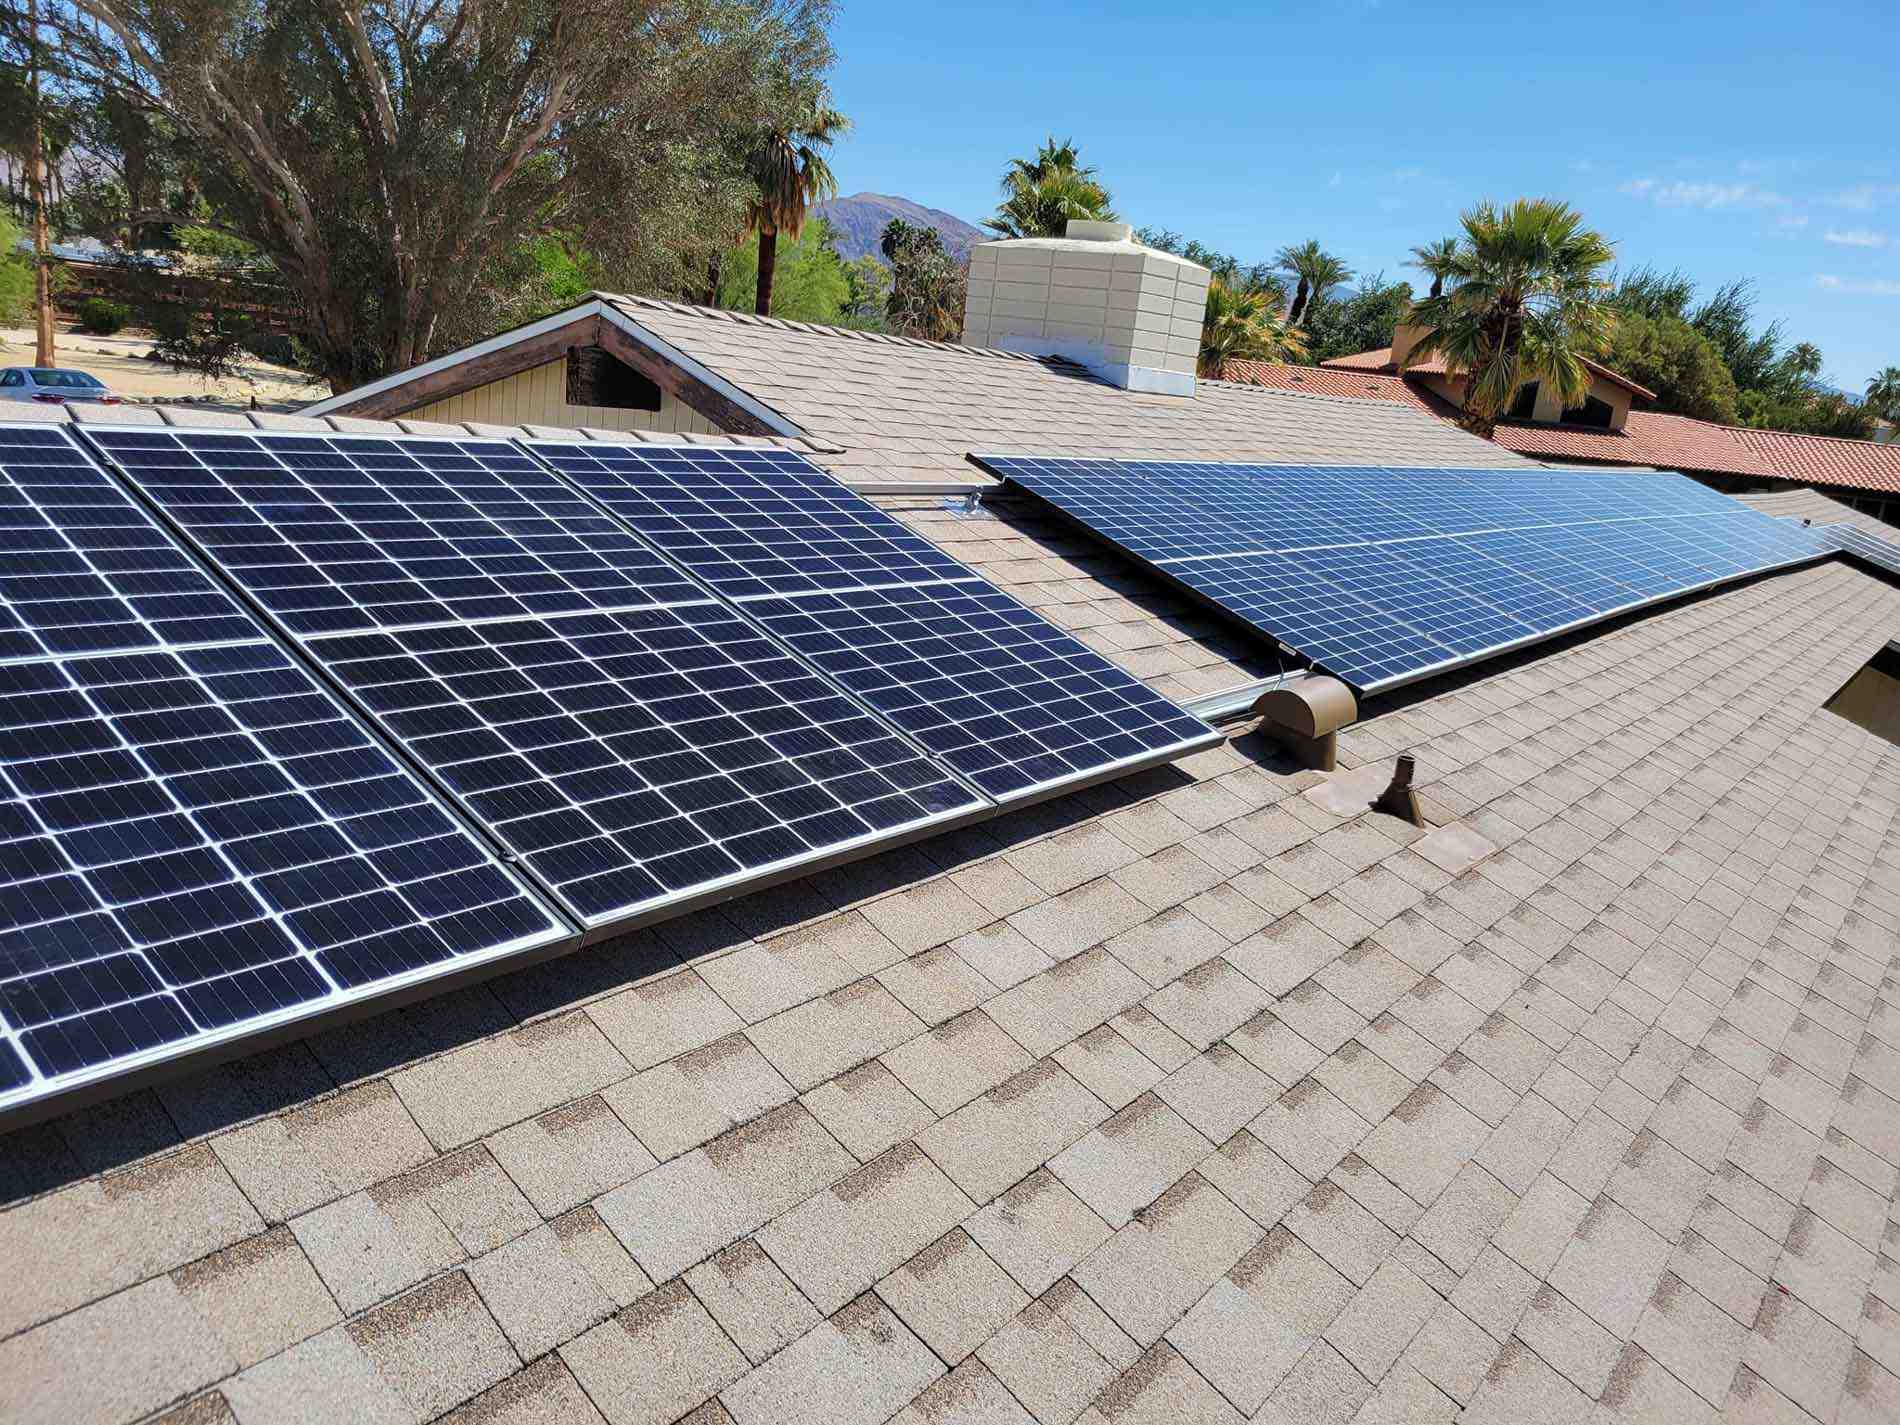 How do you negotiate with solar installers?